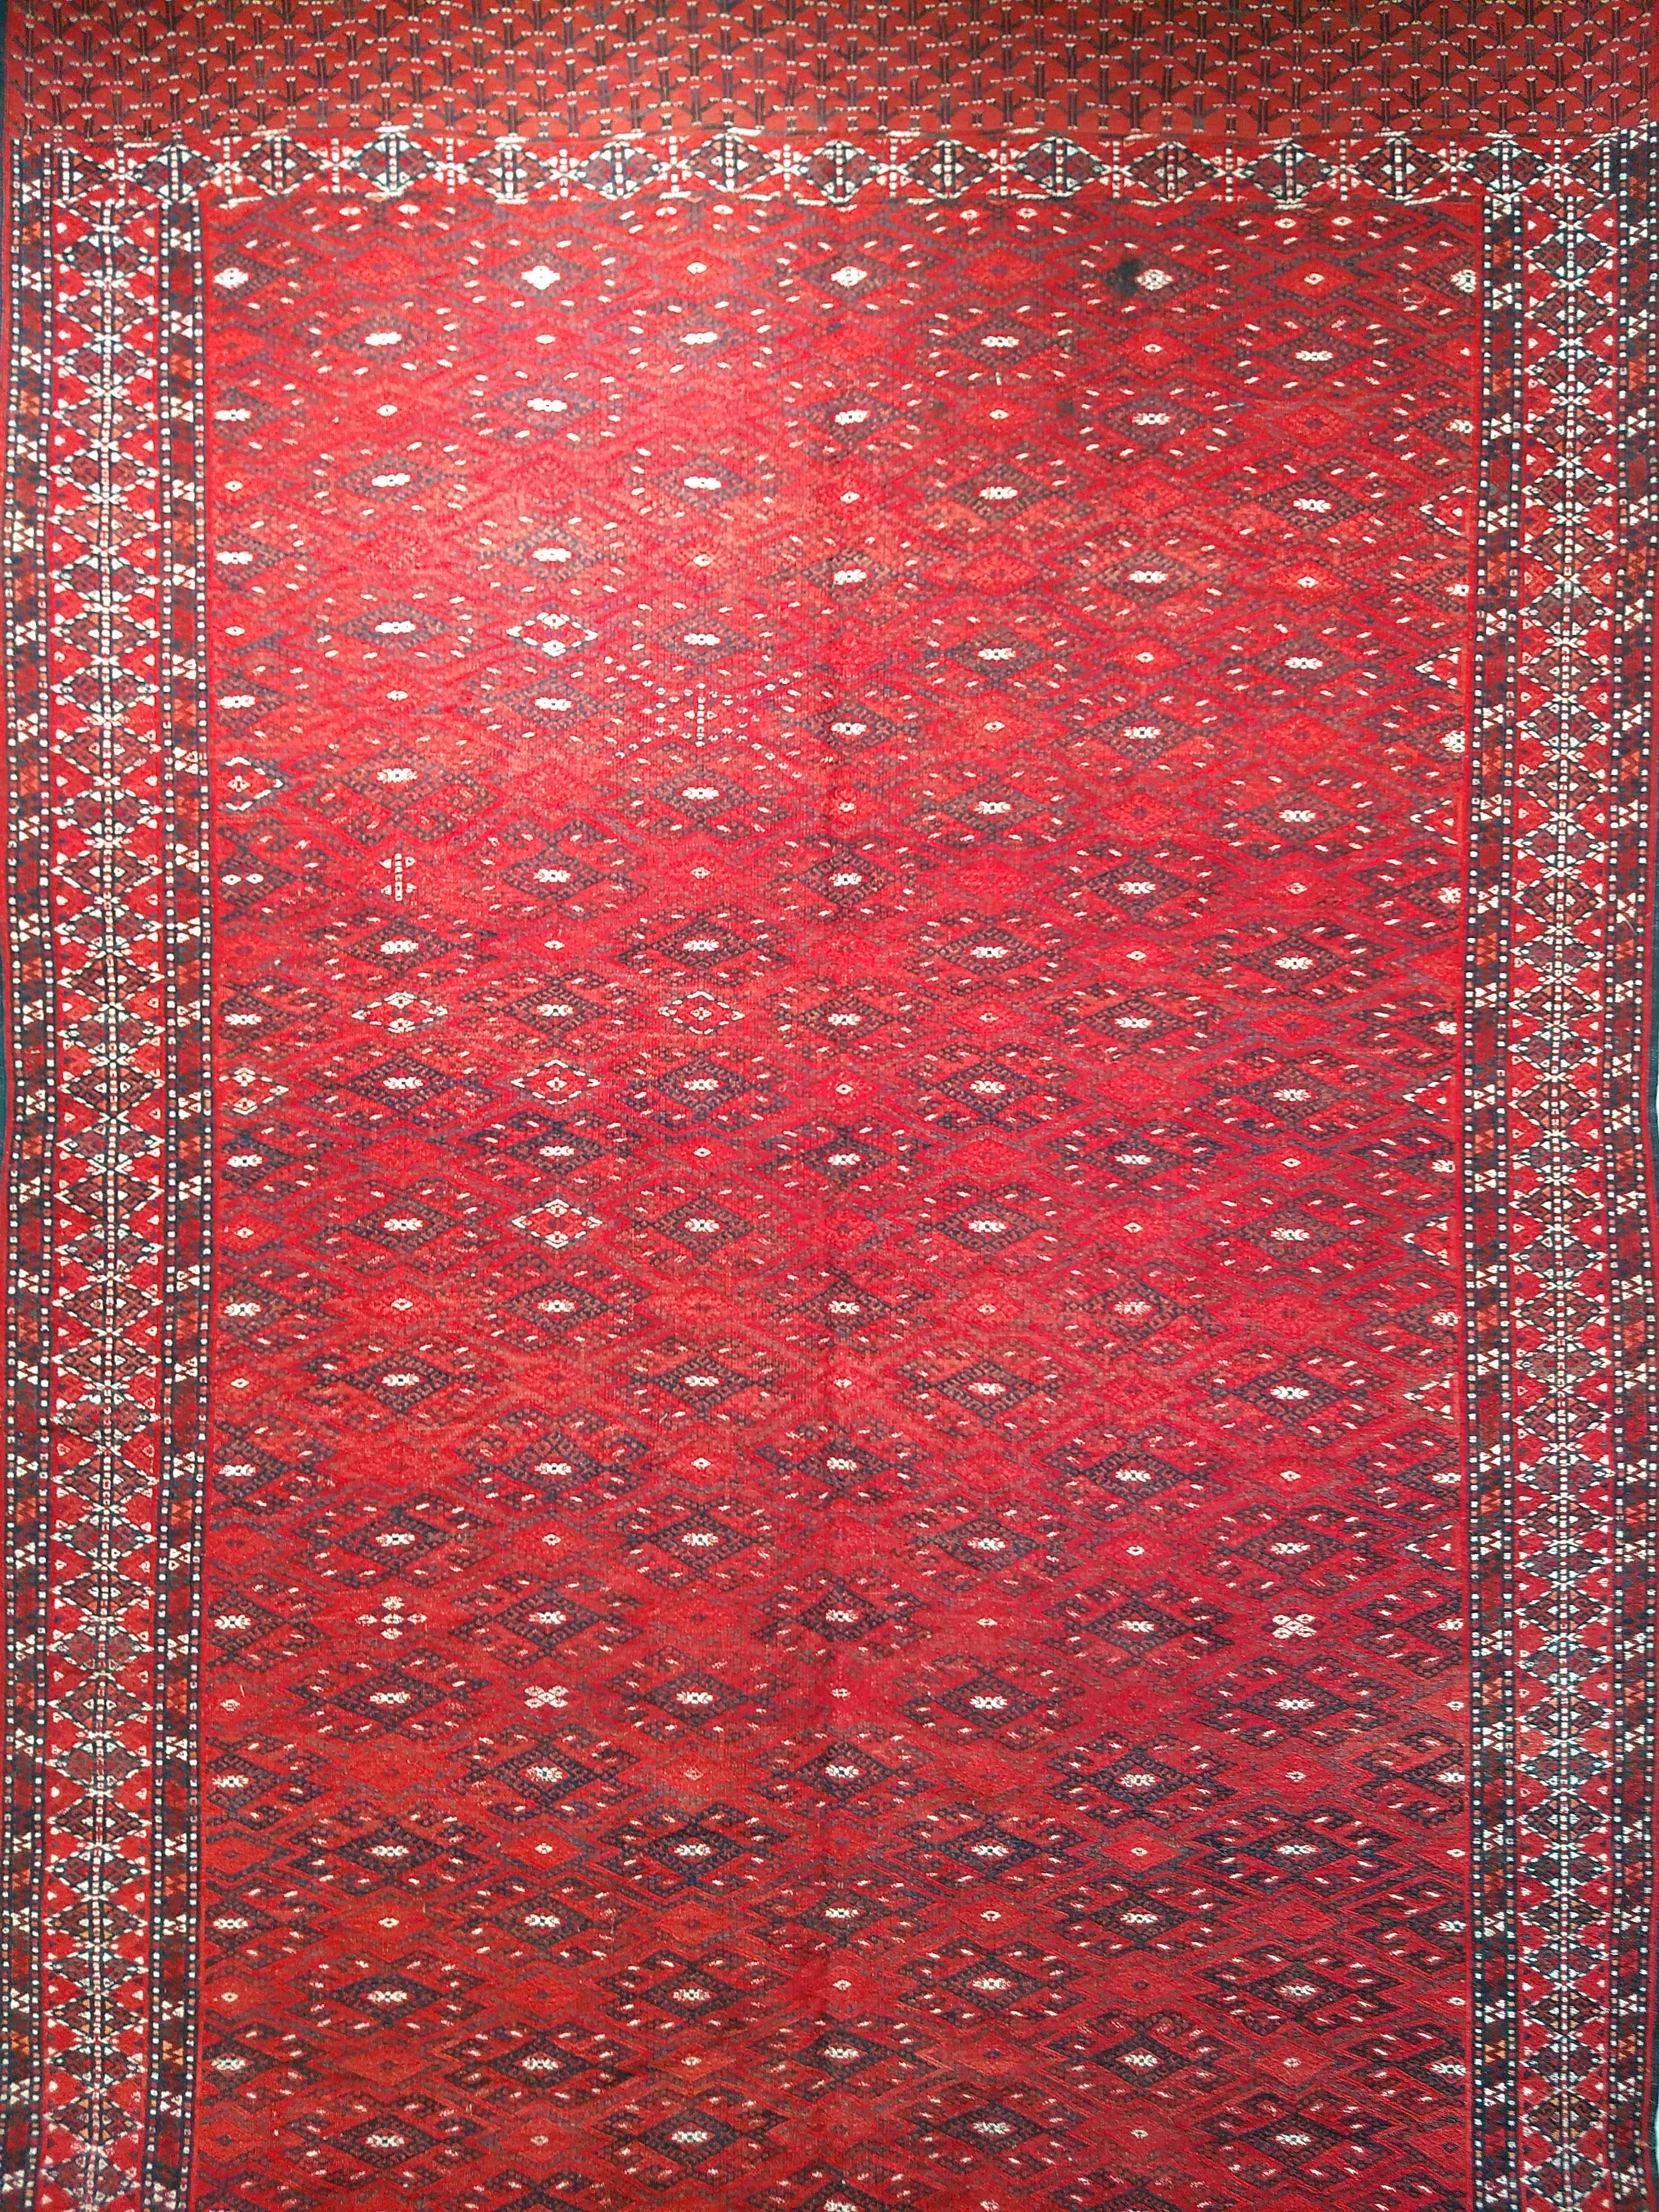 Vintage Turkmen Yomut Soumak rug from Central Asia circa the mid 1900s.  The soumak tapestry-woven has a wool foundation, a wool pile and is in an all-over design which results in a beautifully created tribal rug.  The main field color in this Yomut